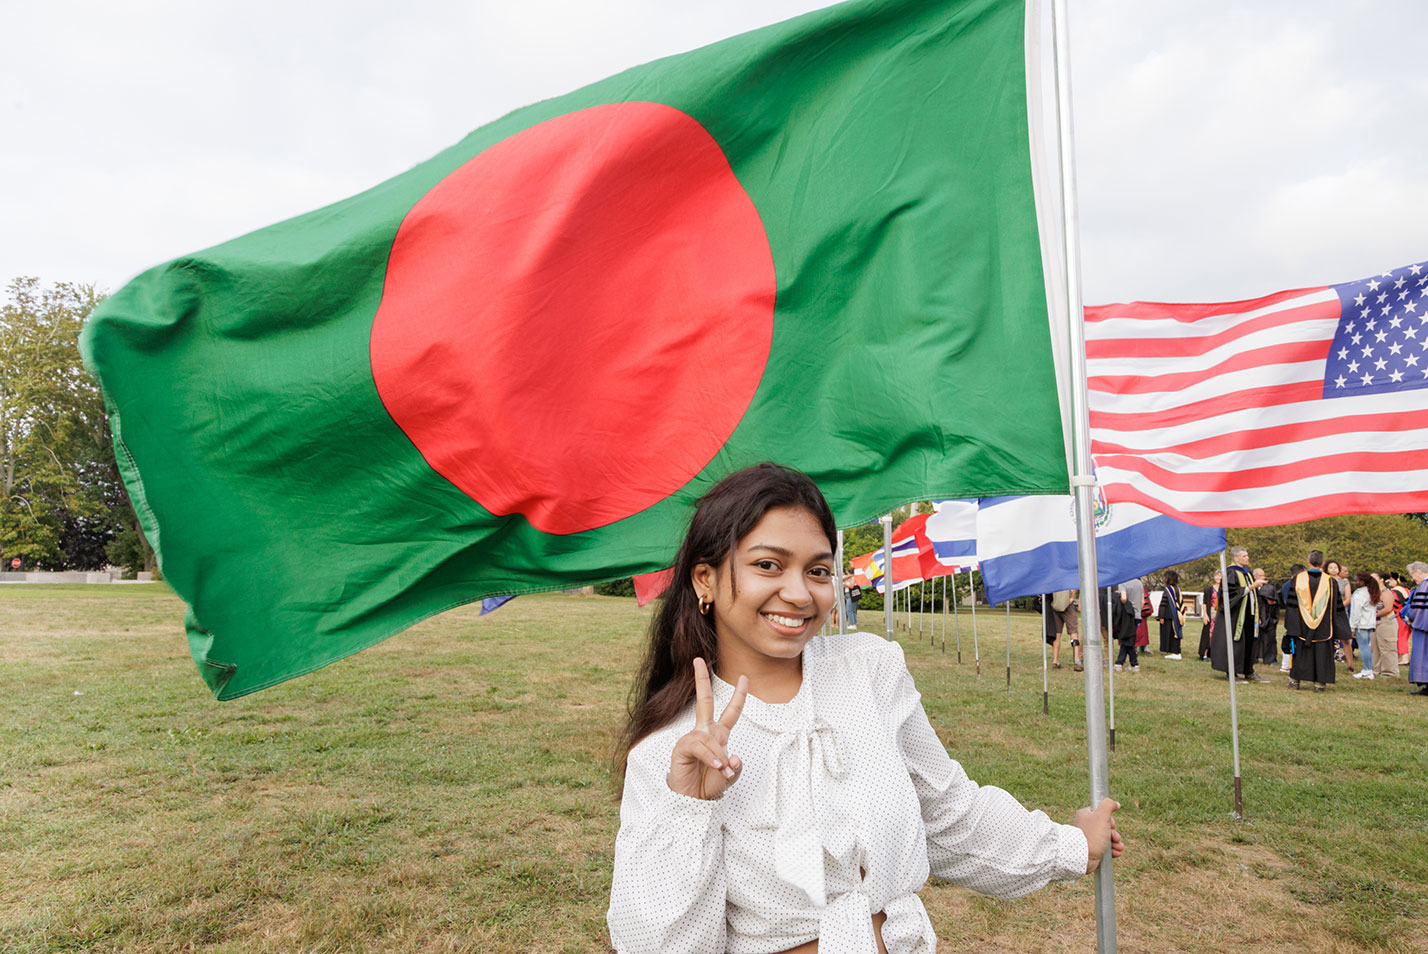 A student poses with one of the flags on the green.